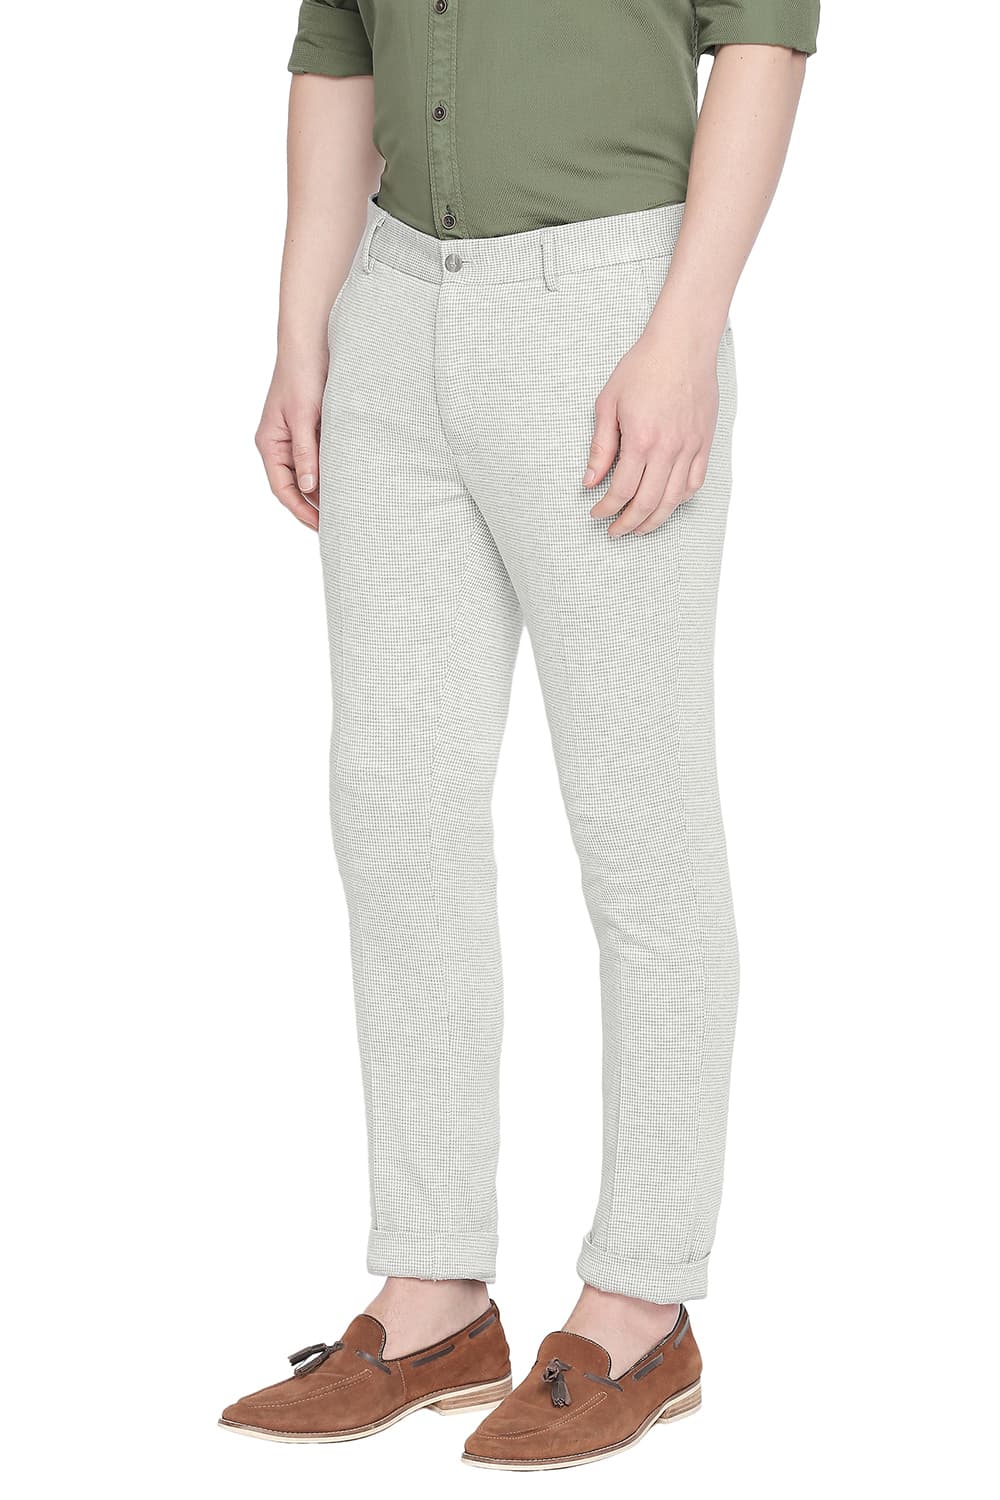 BASICS TAPERED FIT KNIT TROUSER